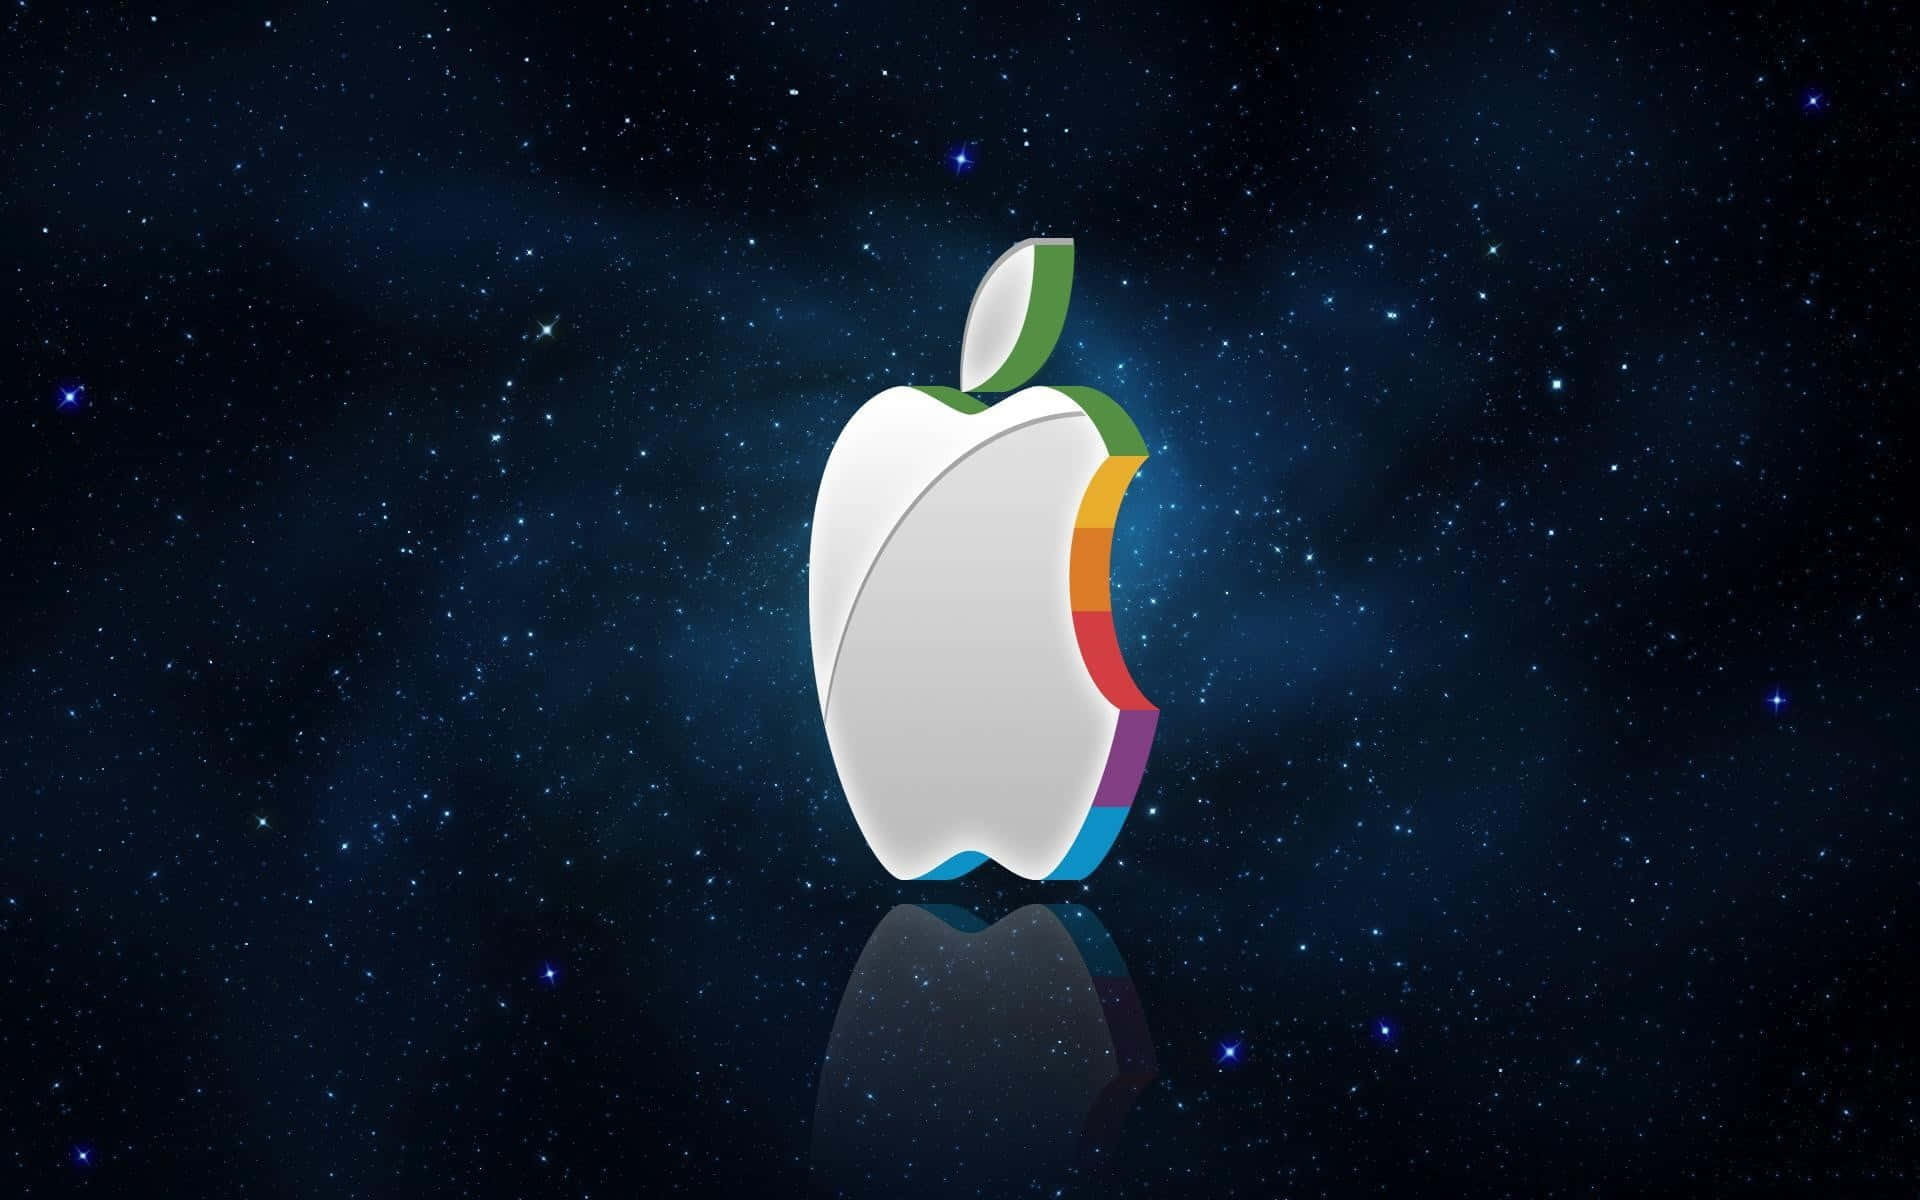 Apple Logo on Colorful Gradient Background